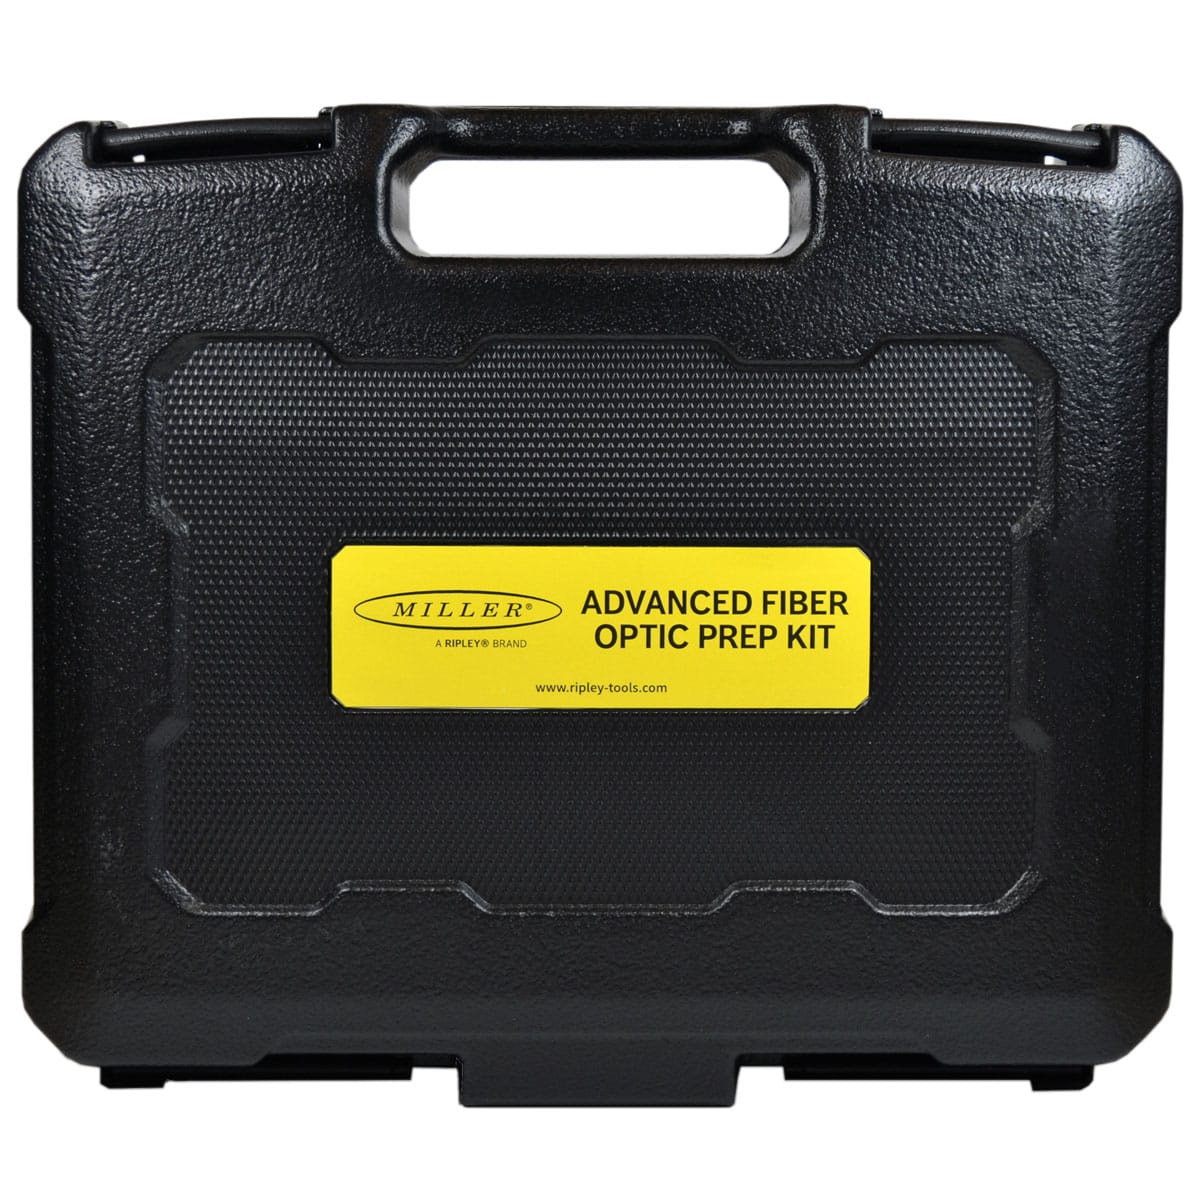 Advanced Fiber Kit Case w/ FO 103S and MB04-7000 image 3